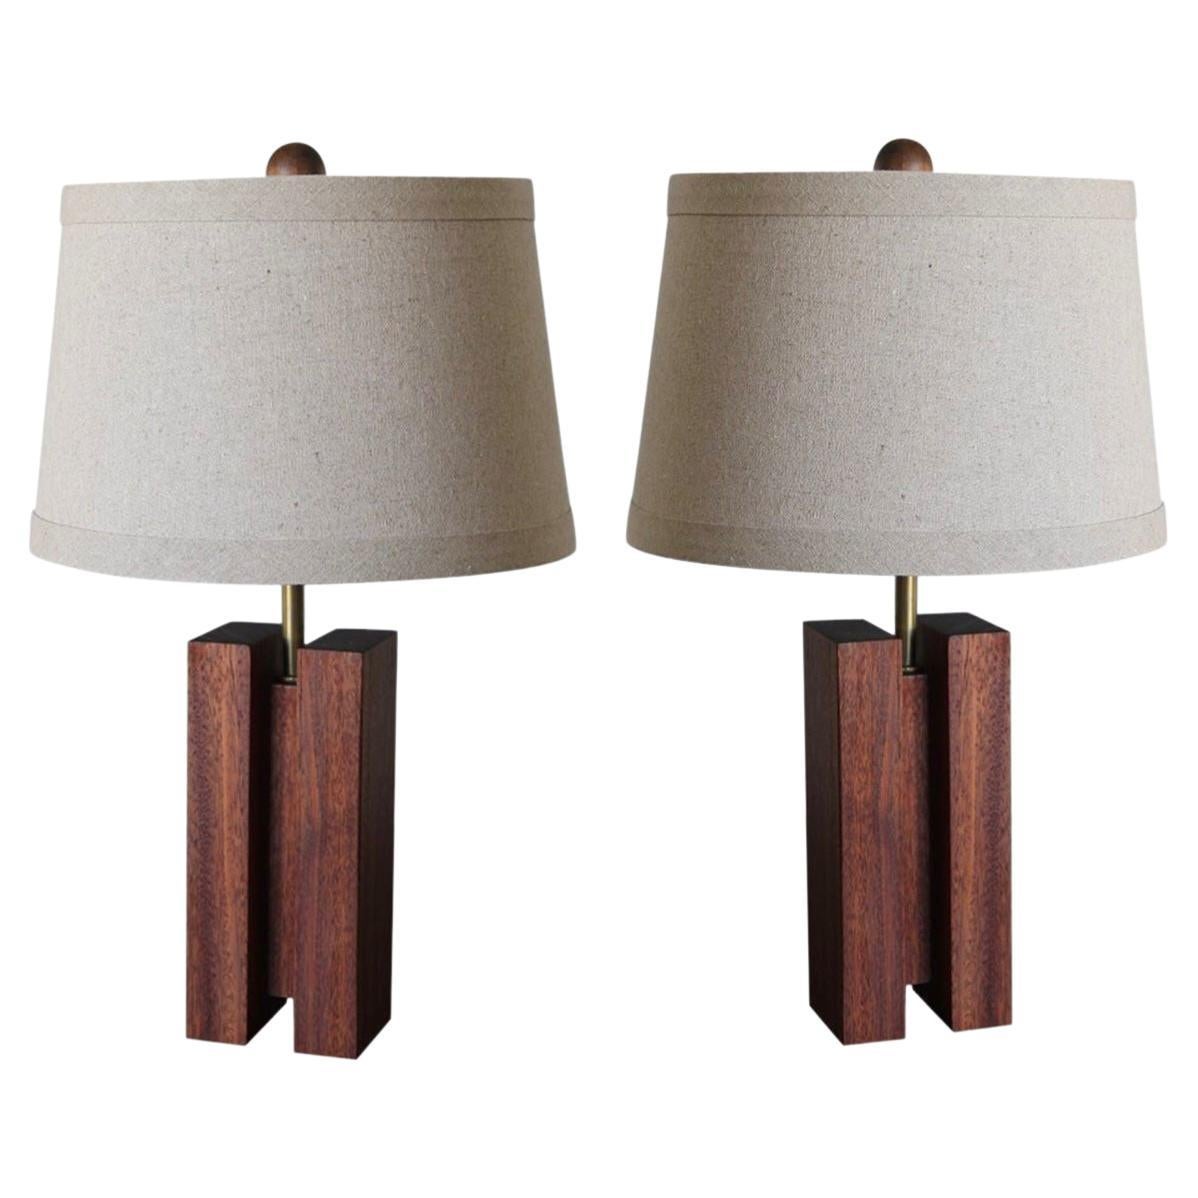 Pair of Chic ‘Cubismo’ Lamp with linen shade by Understated Design